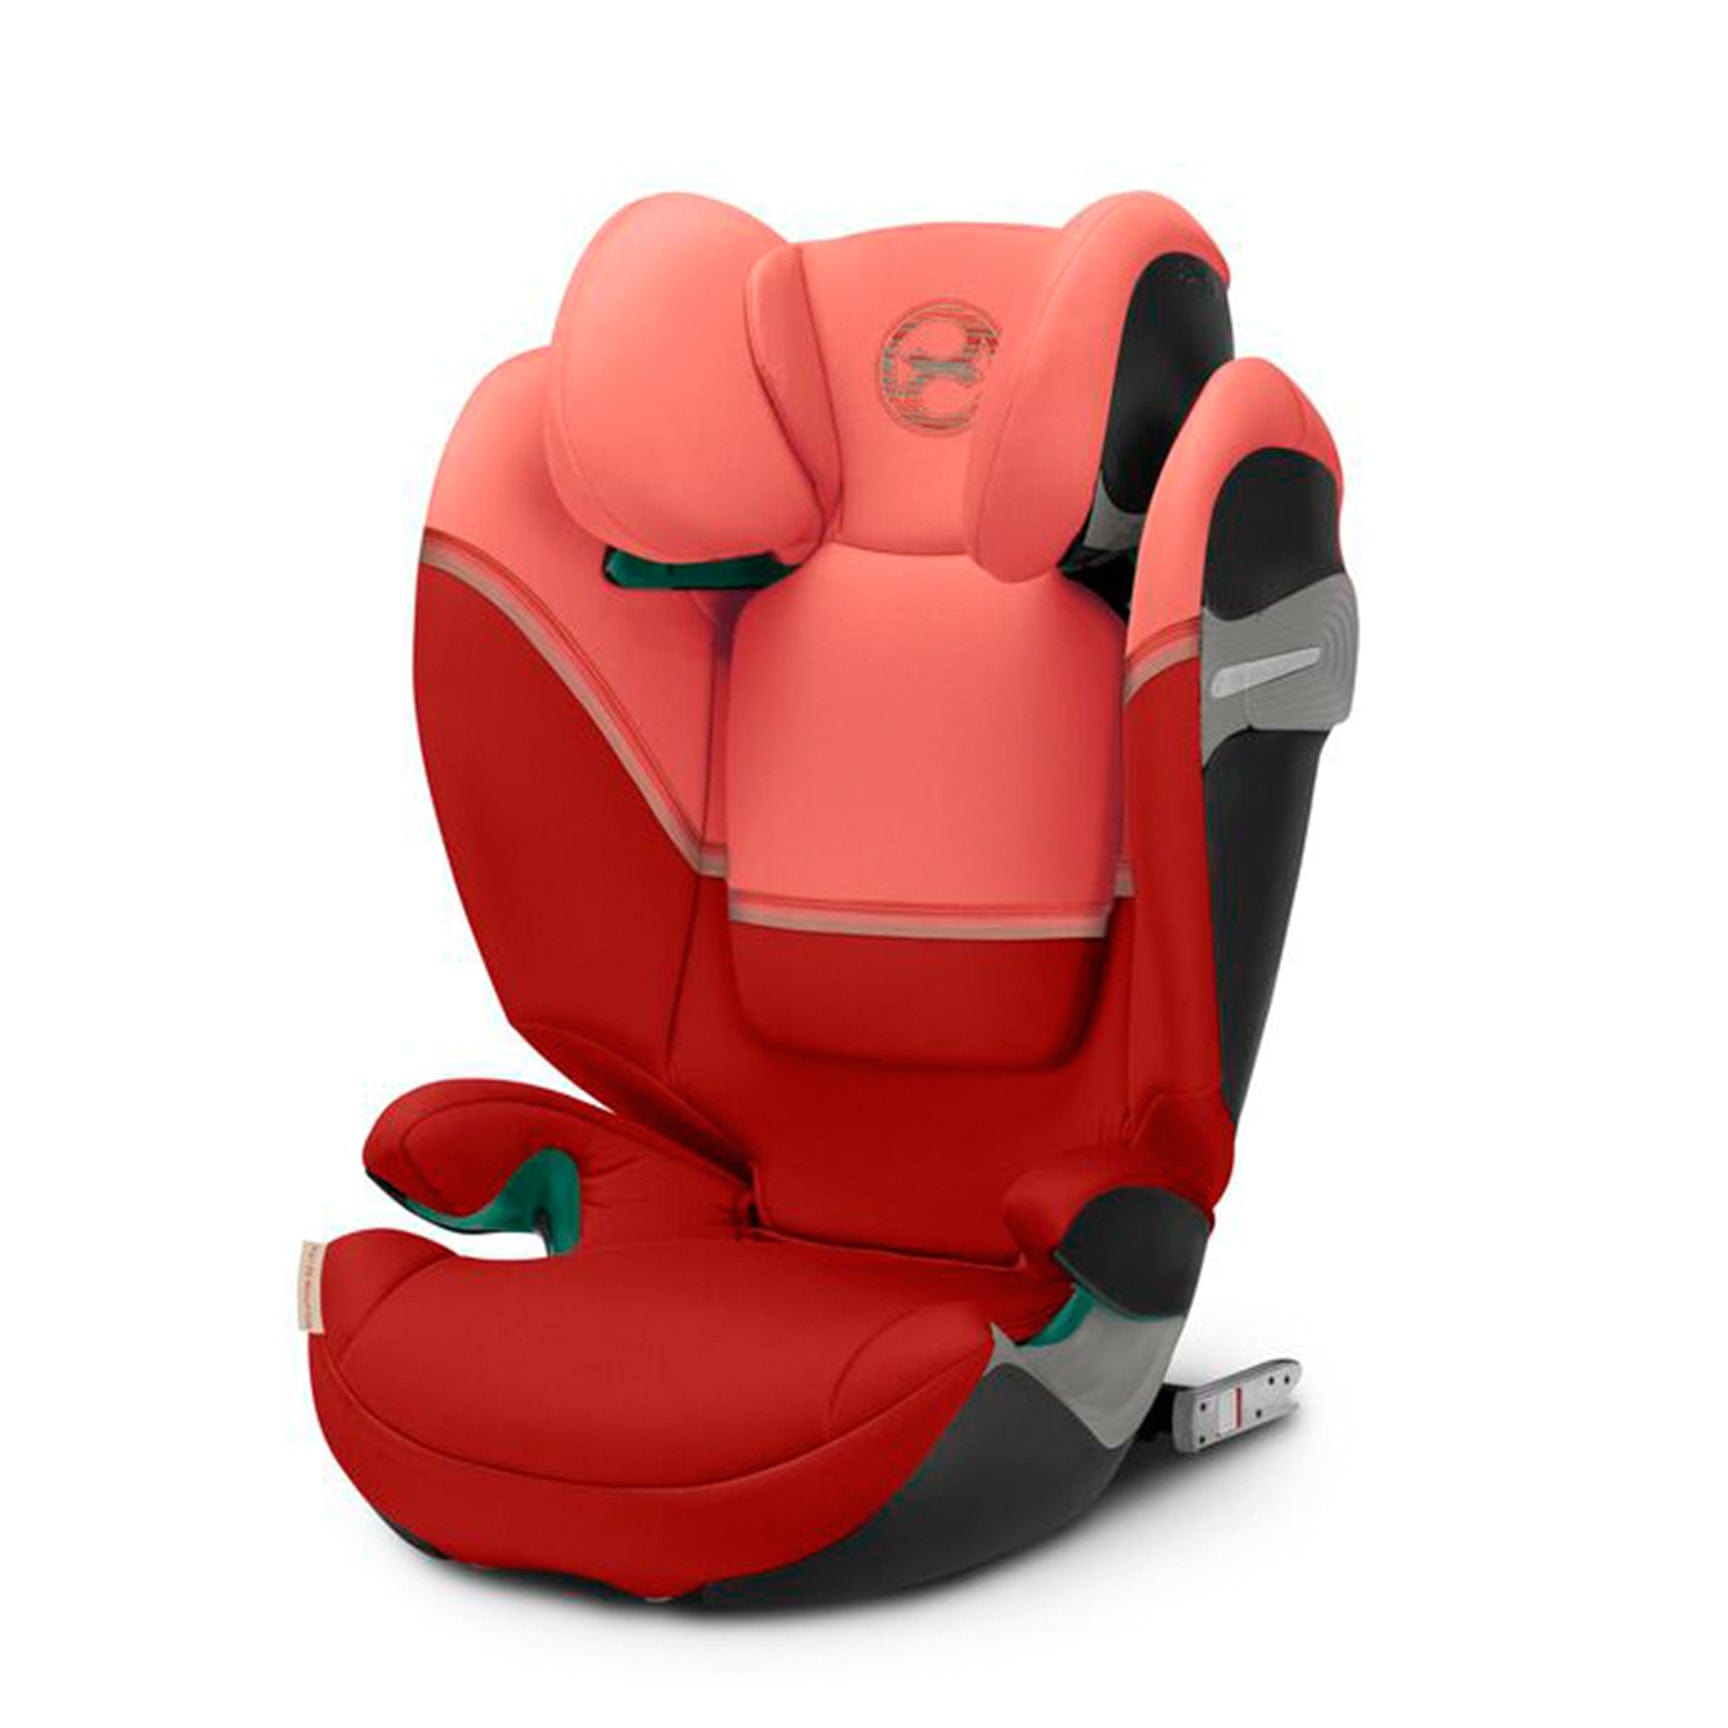 Cybex highback booster seats Cybex Solution S2 i-FIX Highback Booster Seat Hibiscus Red 522002272